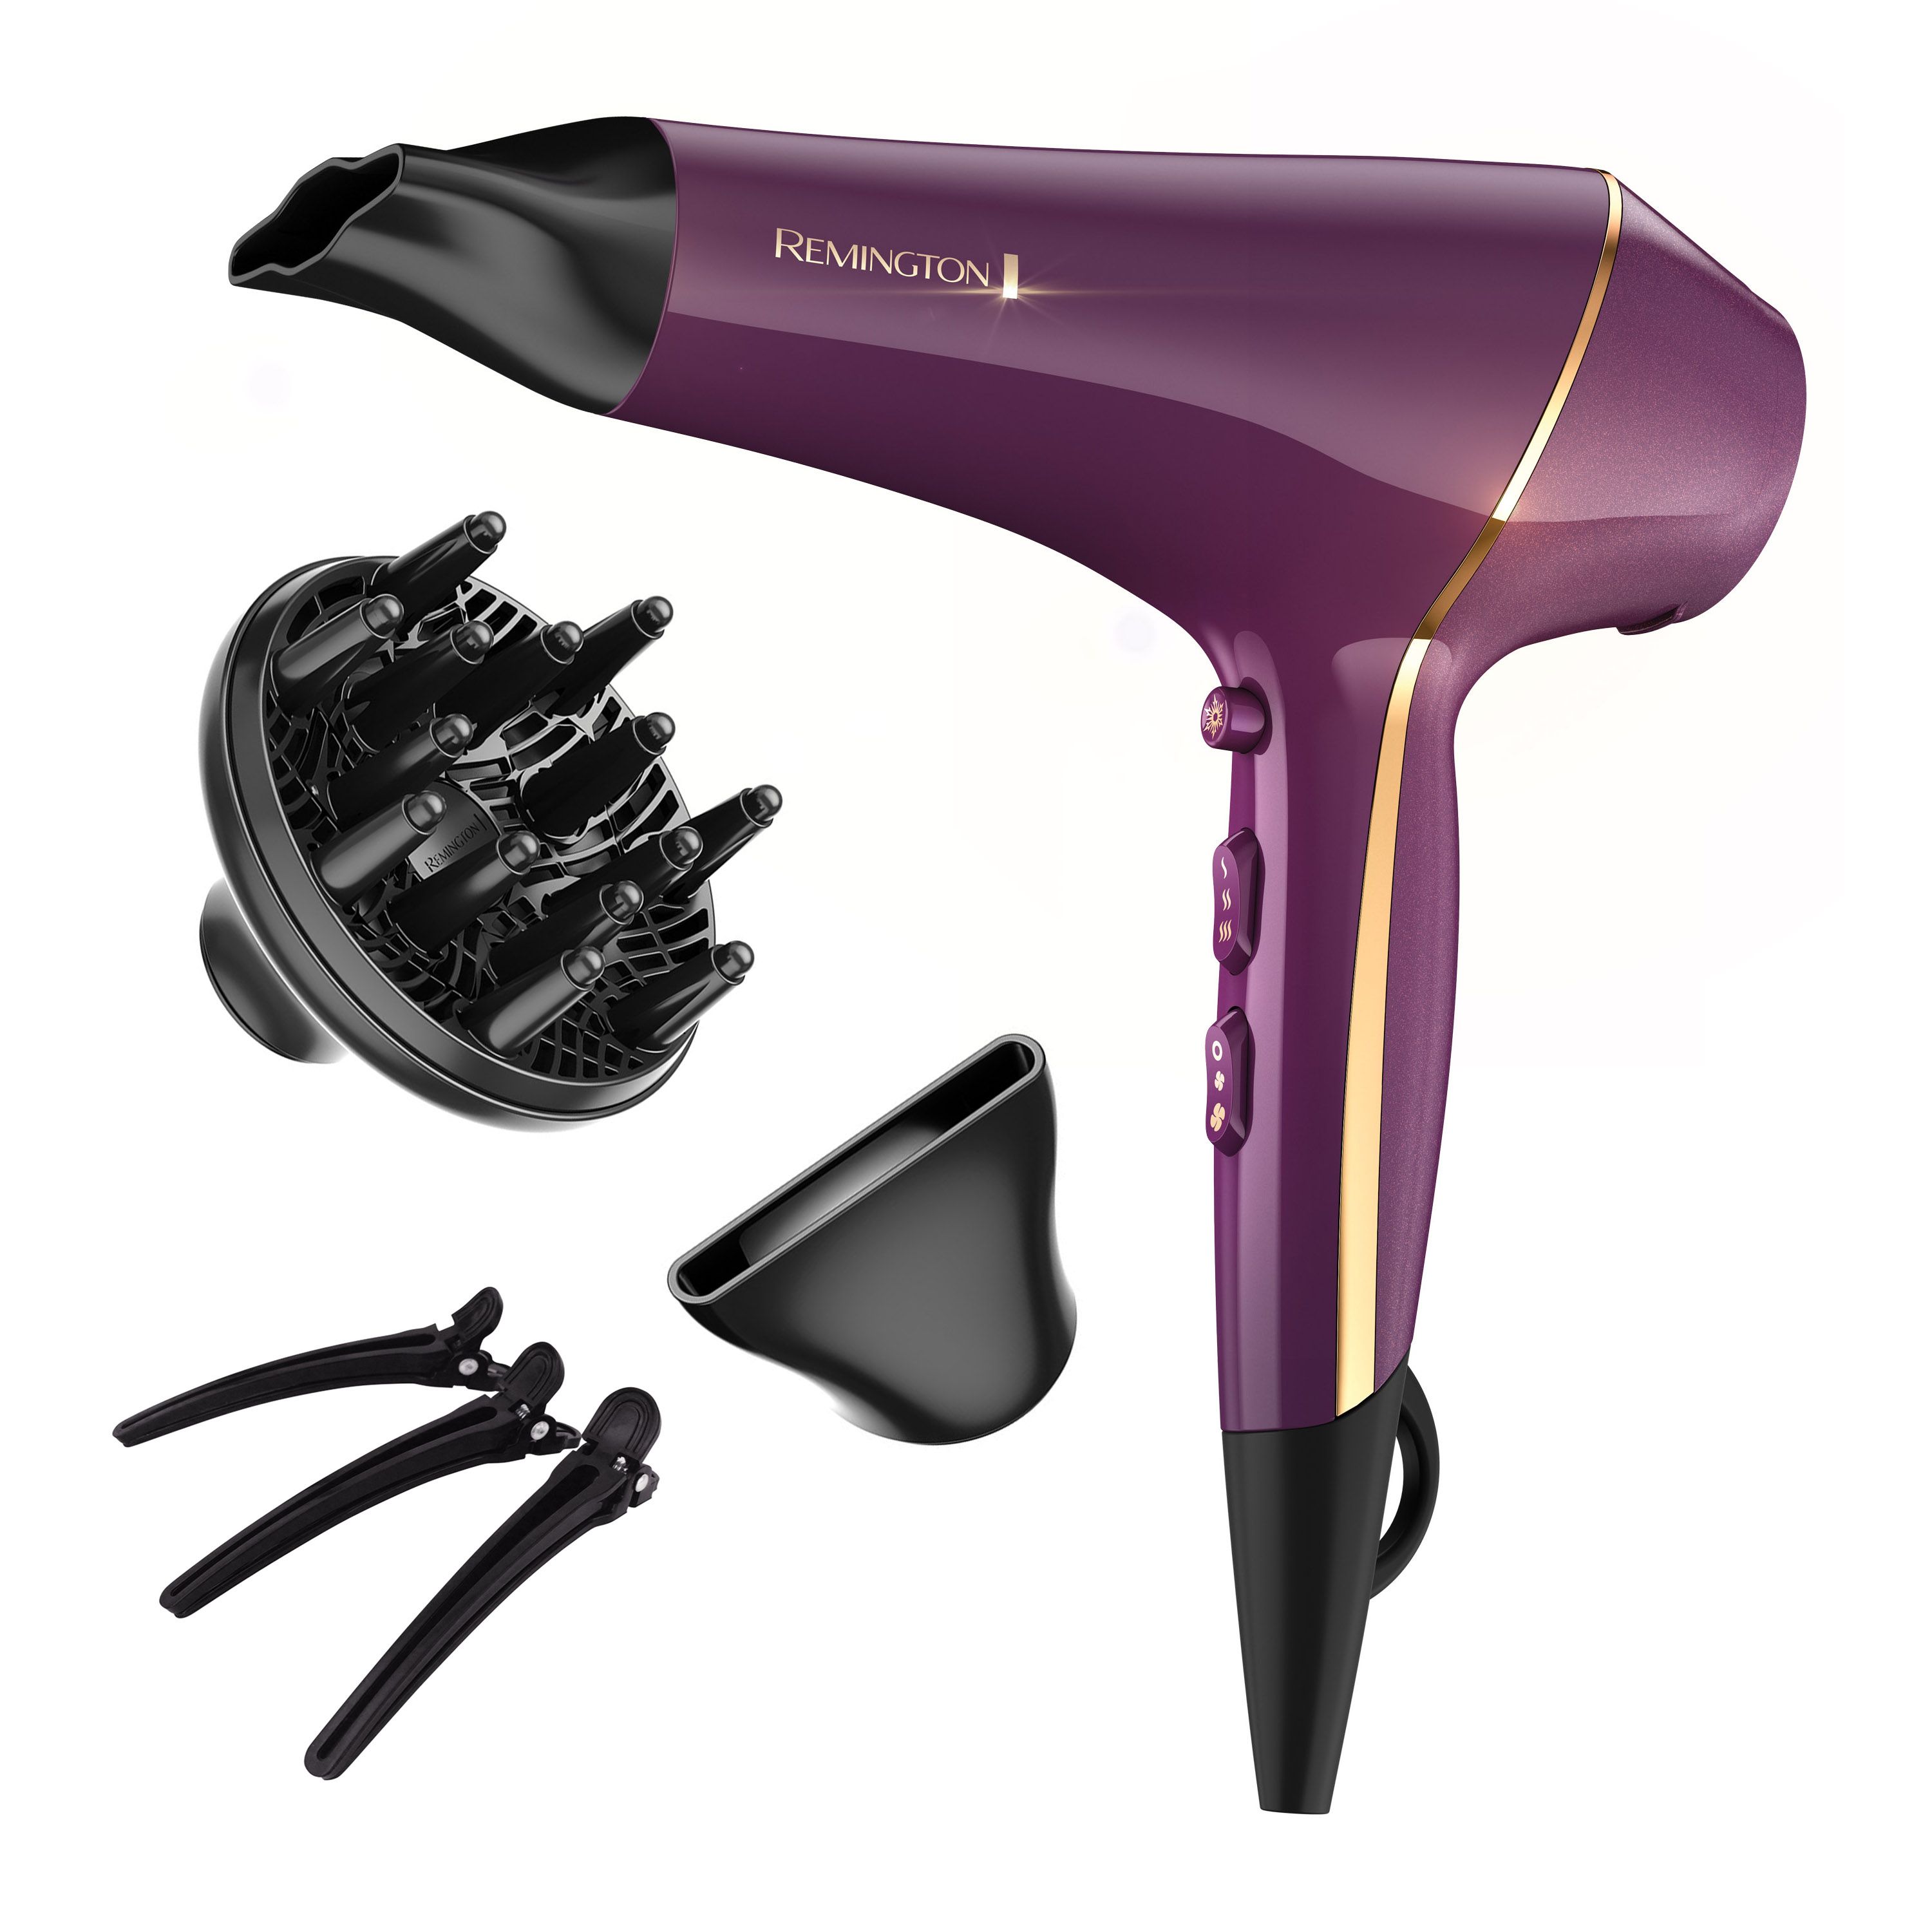 Hands Free Hair Dryer Stand :: hair dryer holder stand with flexible neck,  stable base securely holds hand held hair dryer